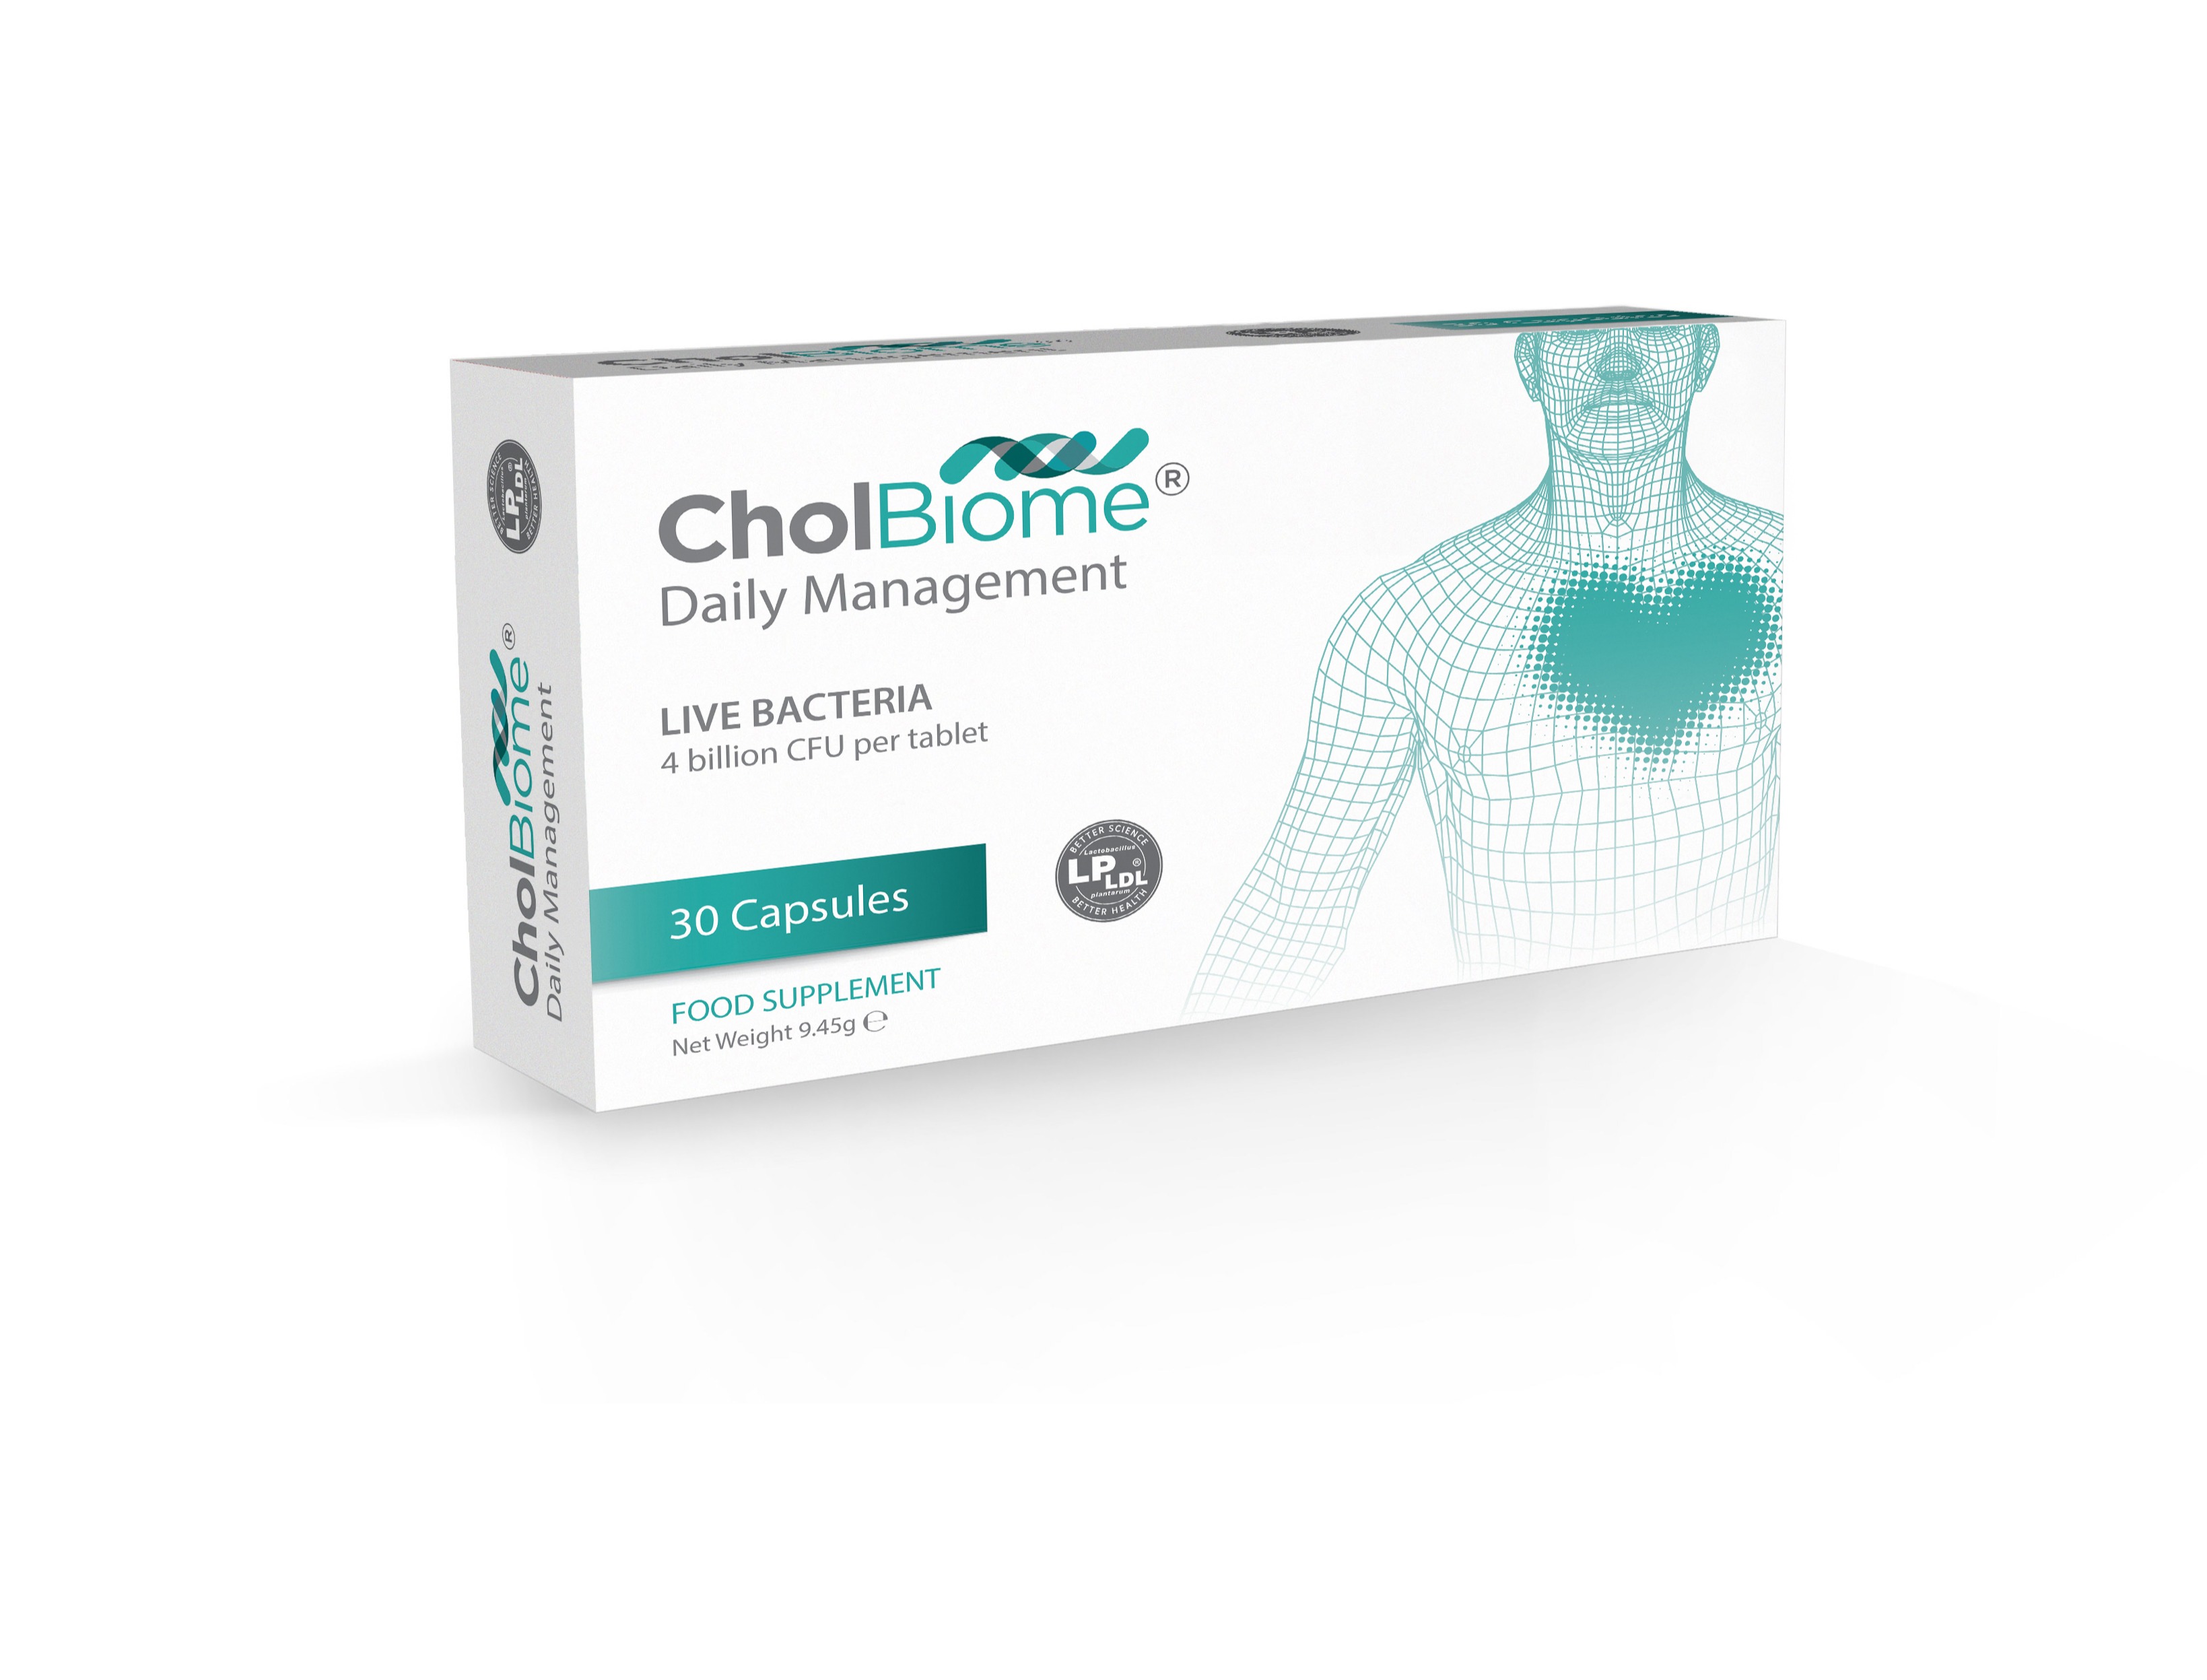 CholBiome® - For Cholesterol Support 5446